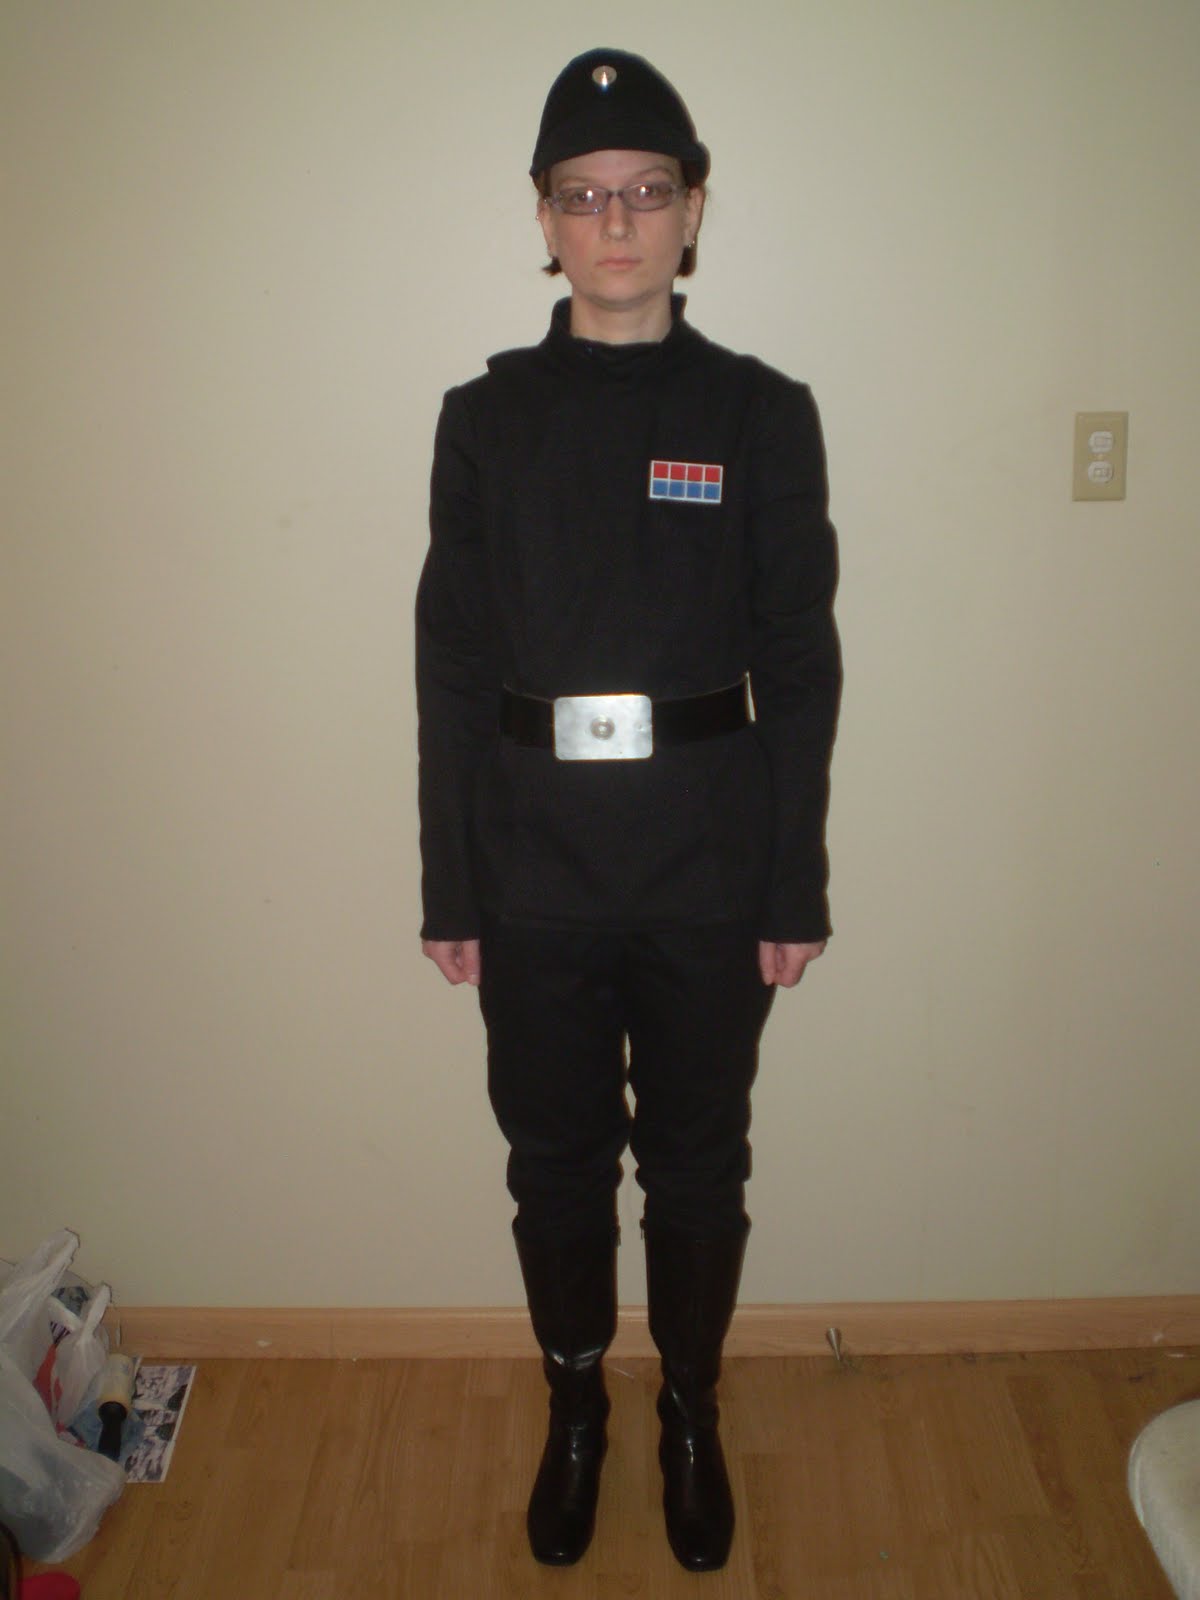 Miss Leah Wilde's Sewing Blog: Imperial Officer Uniform Photos - Now with Pants!1200 x 1600